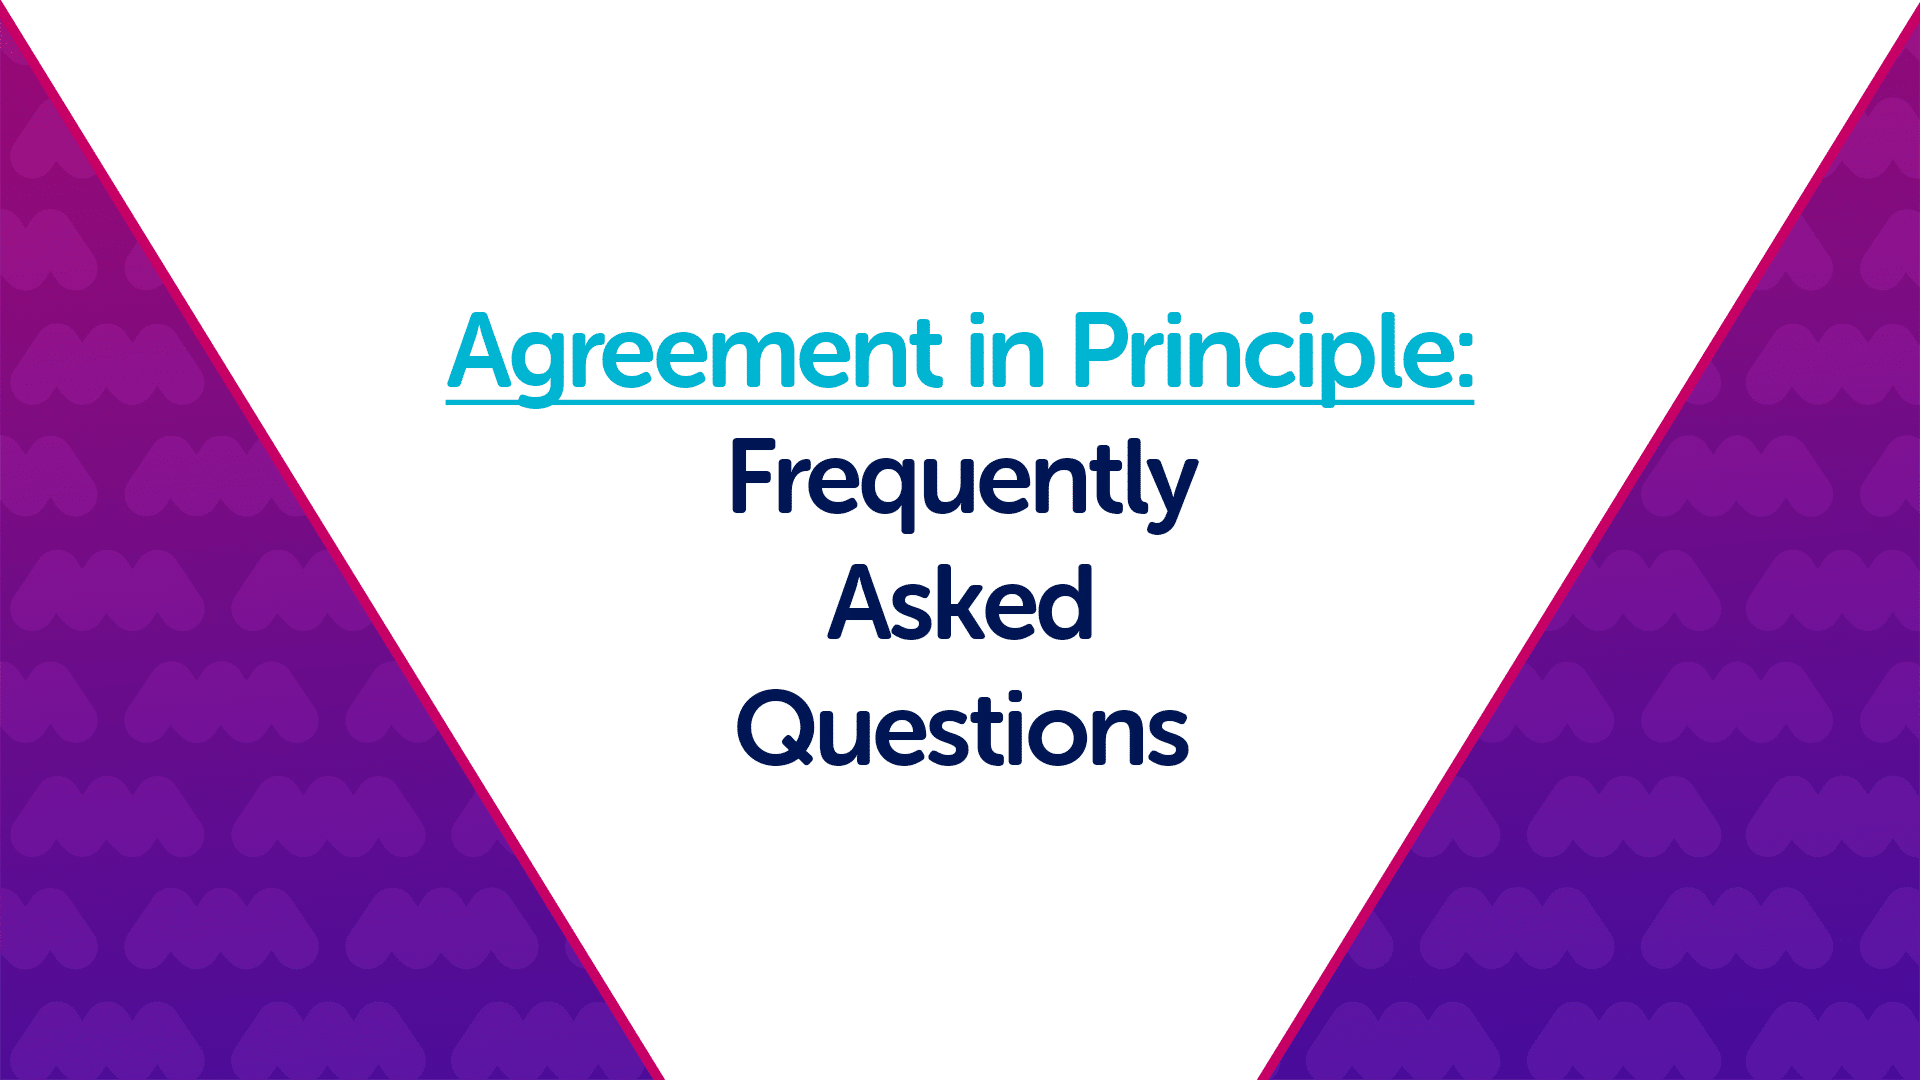 Agreement in Principle: Frequently Asked Questions